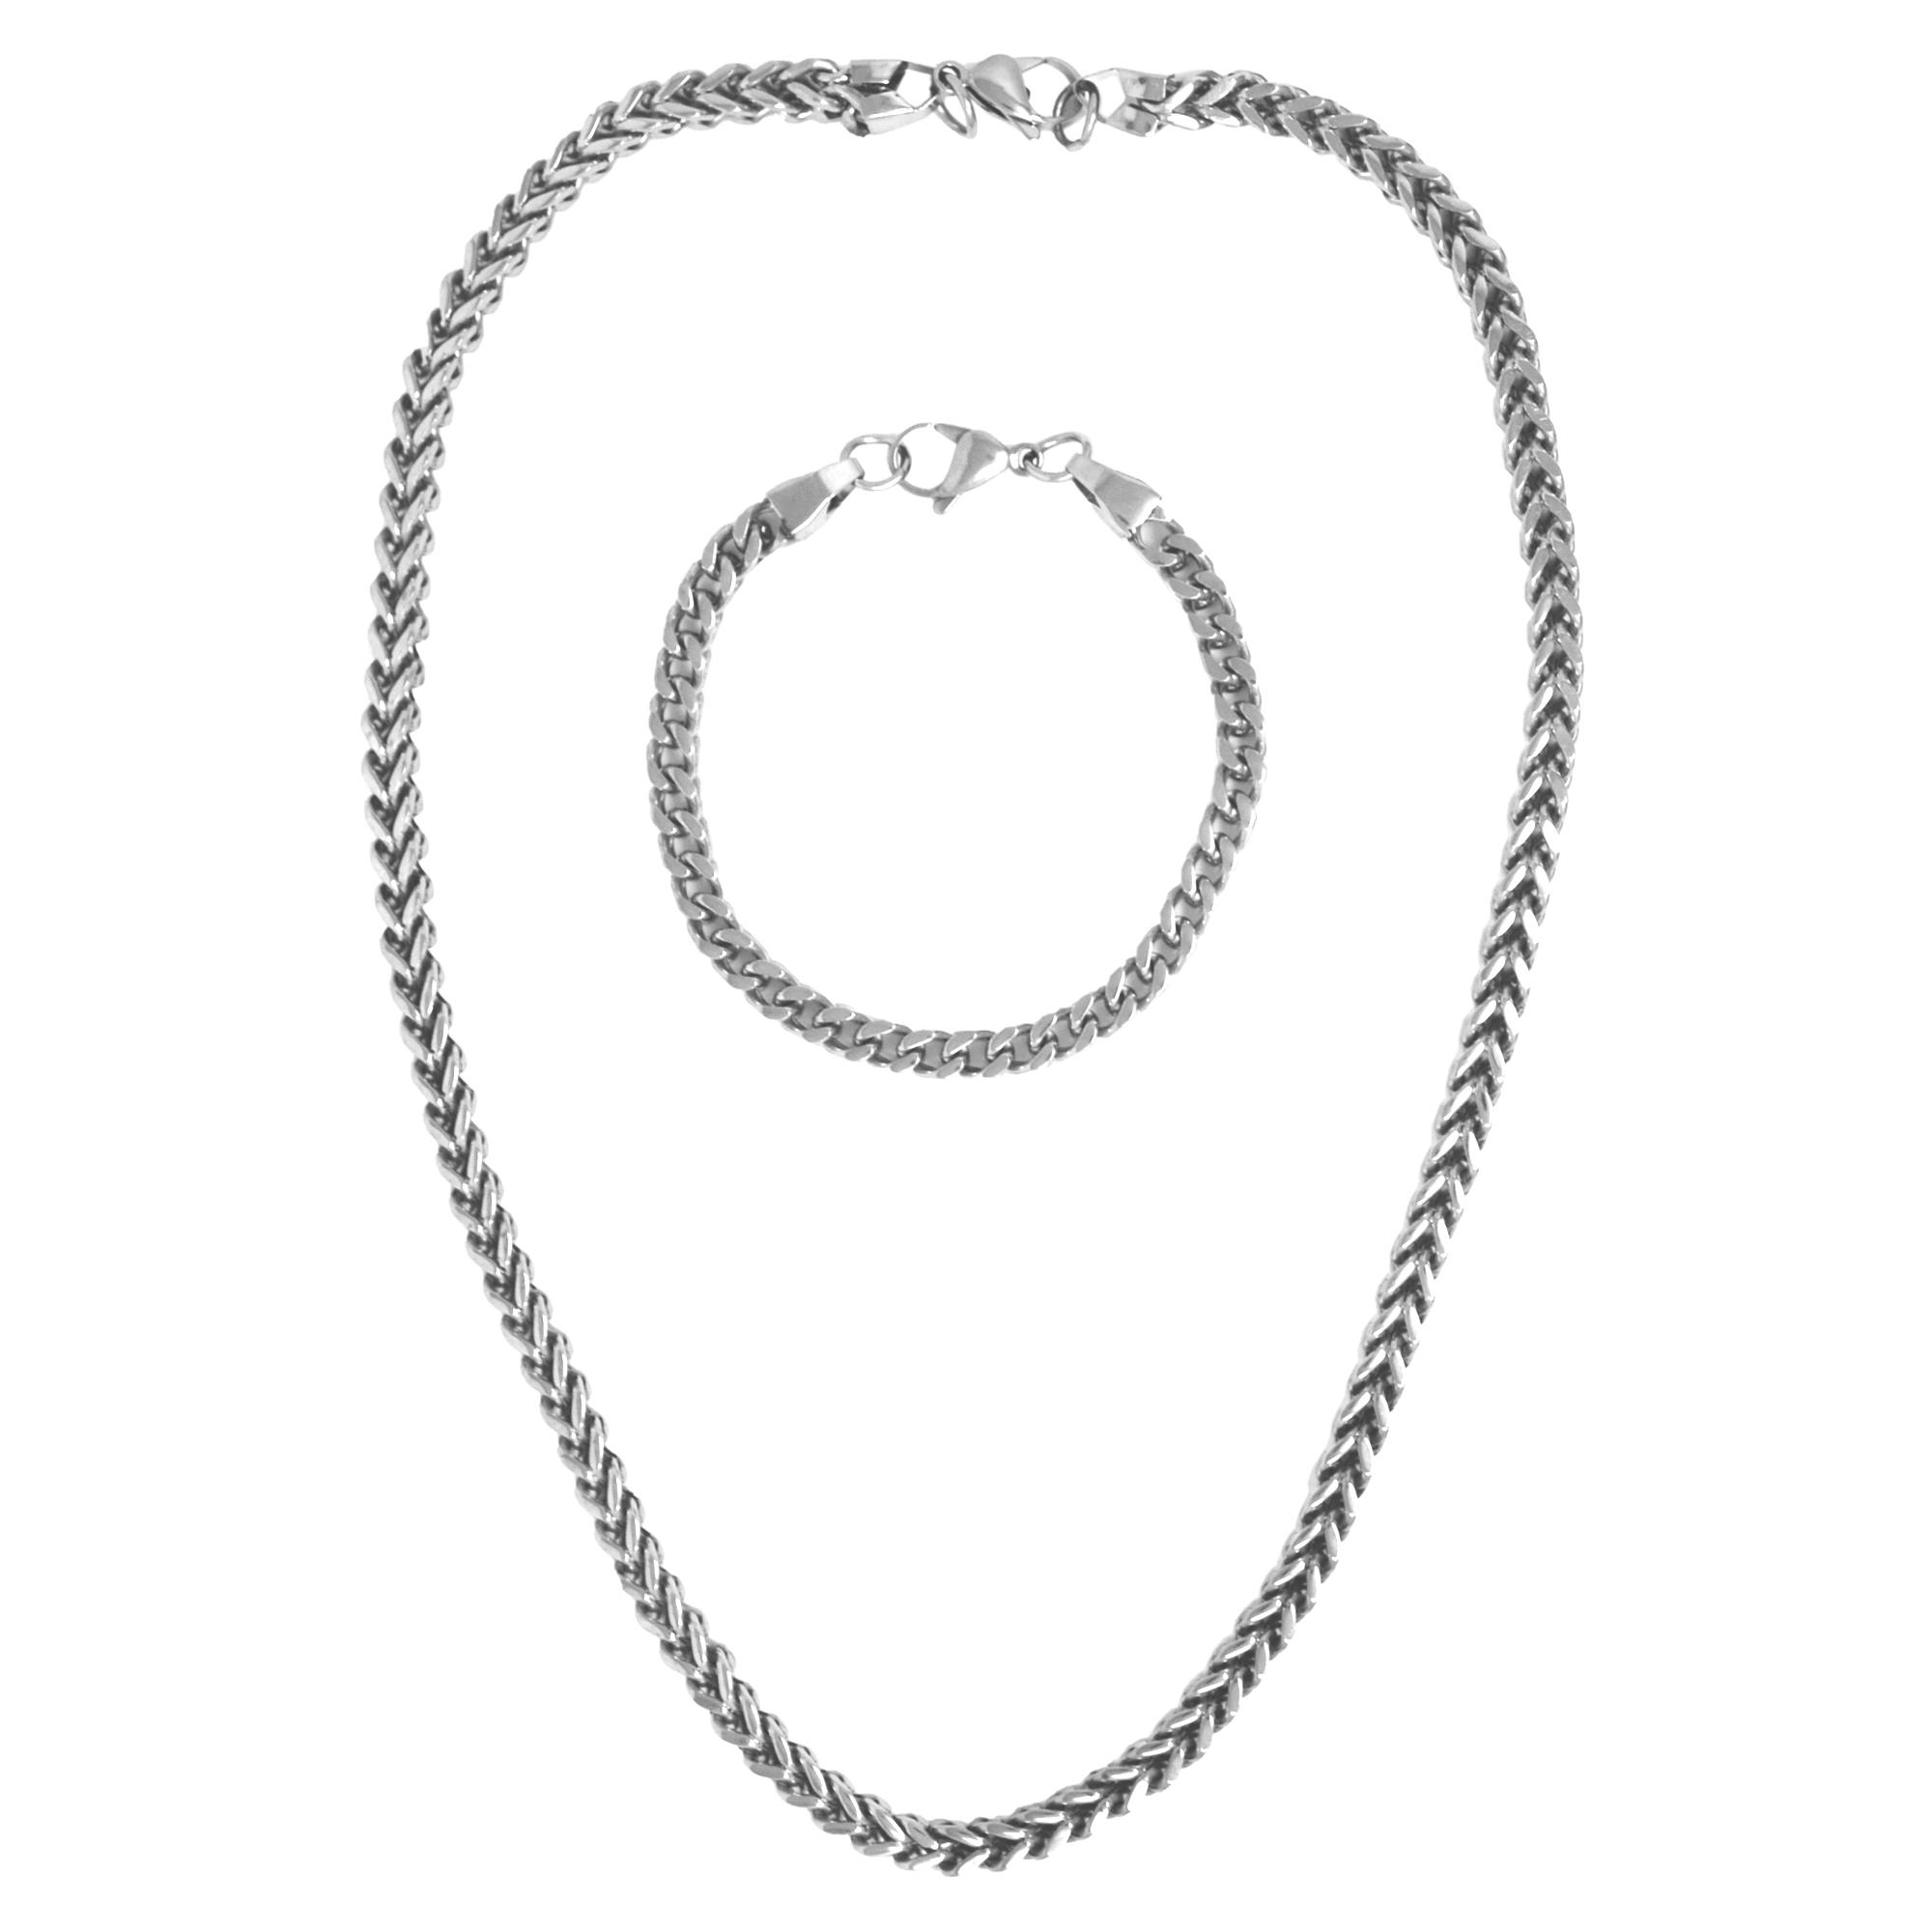 S STEEL 24IN/61CM CHAINMAIL LINK NECKLACE & BRACELET